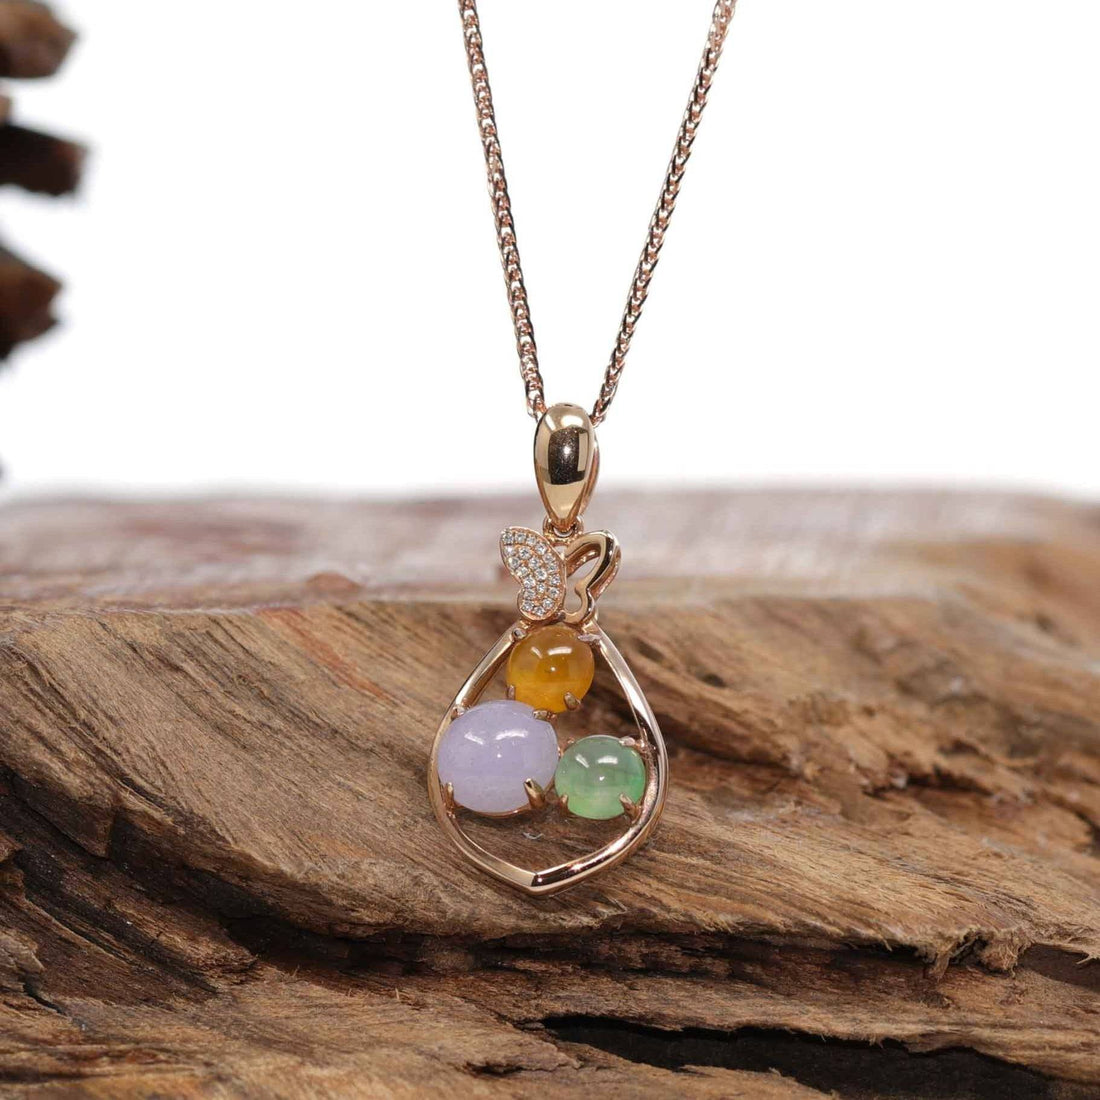 Baikalla Jewelry 18k Gold Jadeite Necklace Pendant Only 18K Rose Gold "Lucky Goodie Sack" Multi-Color Jadeite Jade Cabochon Necklace with Diamonds